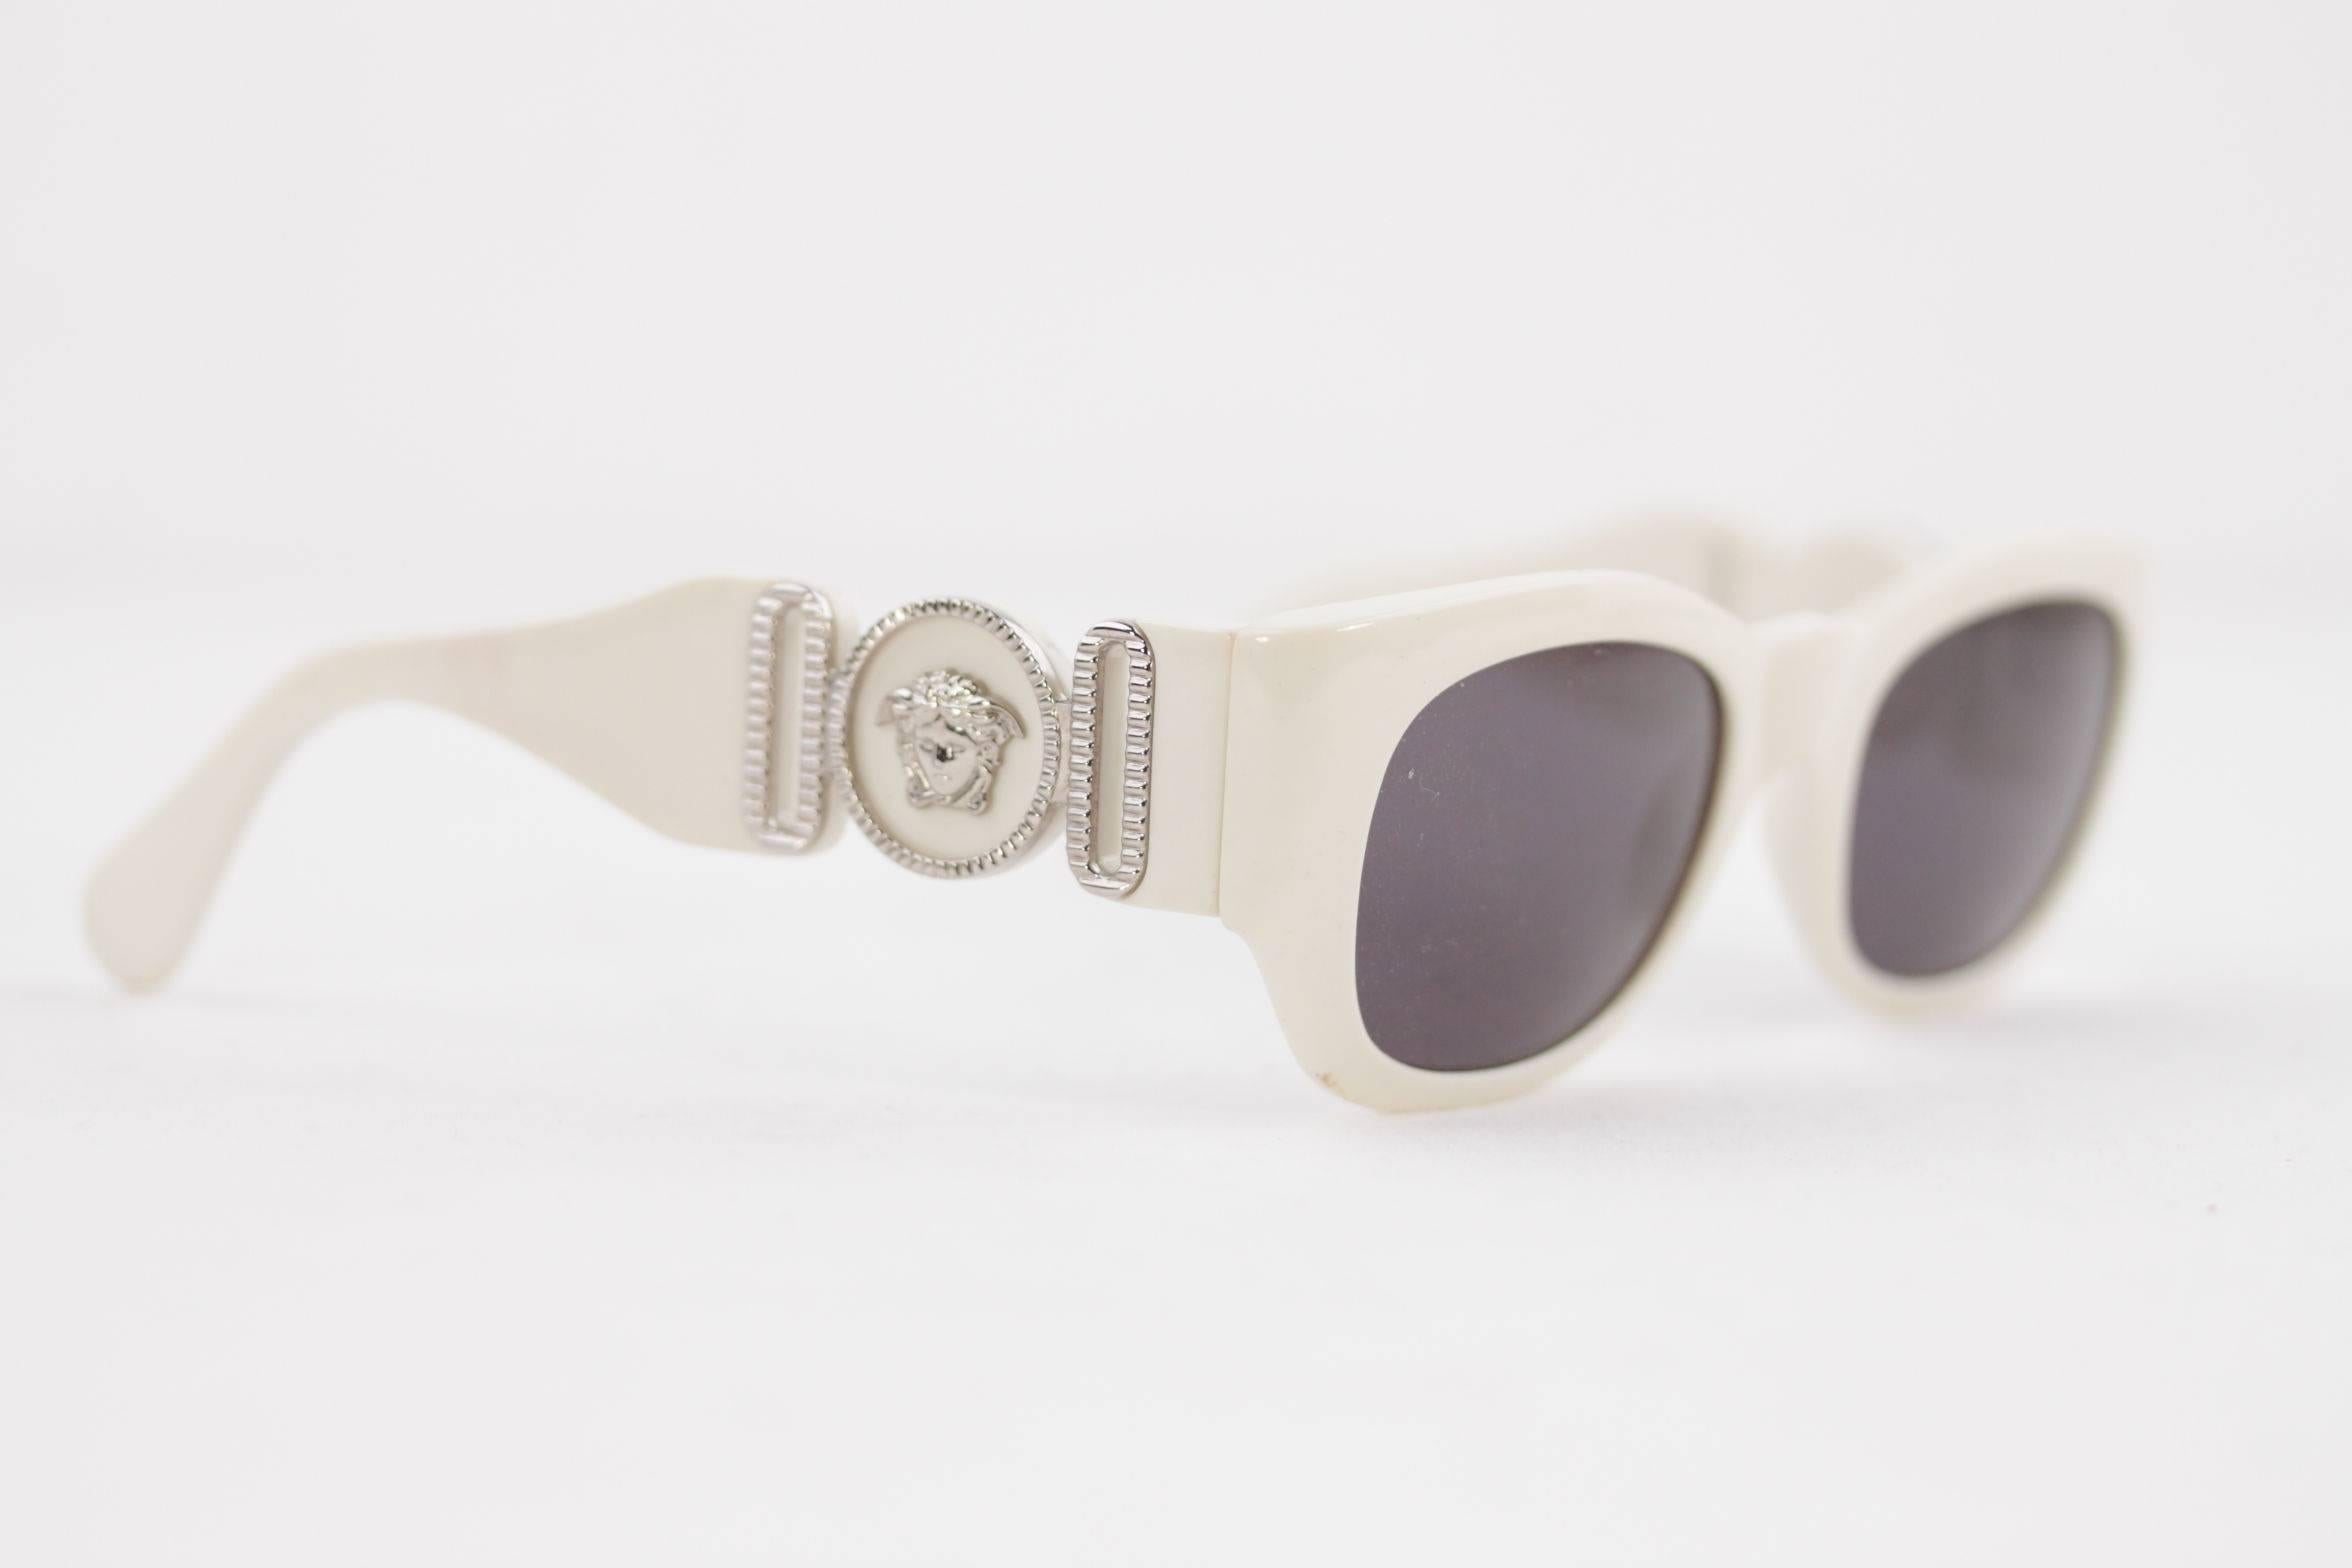 - One of the most wanted Sunglasses of Versace

- White Frame with Smoke lenses

- Silver metal MEDUSA detailing on the sides

- Exclusive design made in Italy

- Worn by 'Notorious B.I.G.'

- Original vintage sunglasses from the